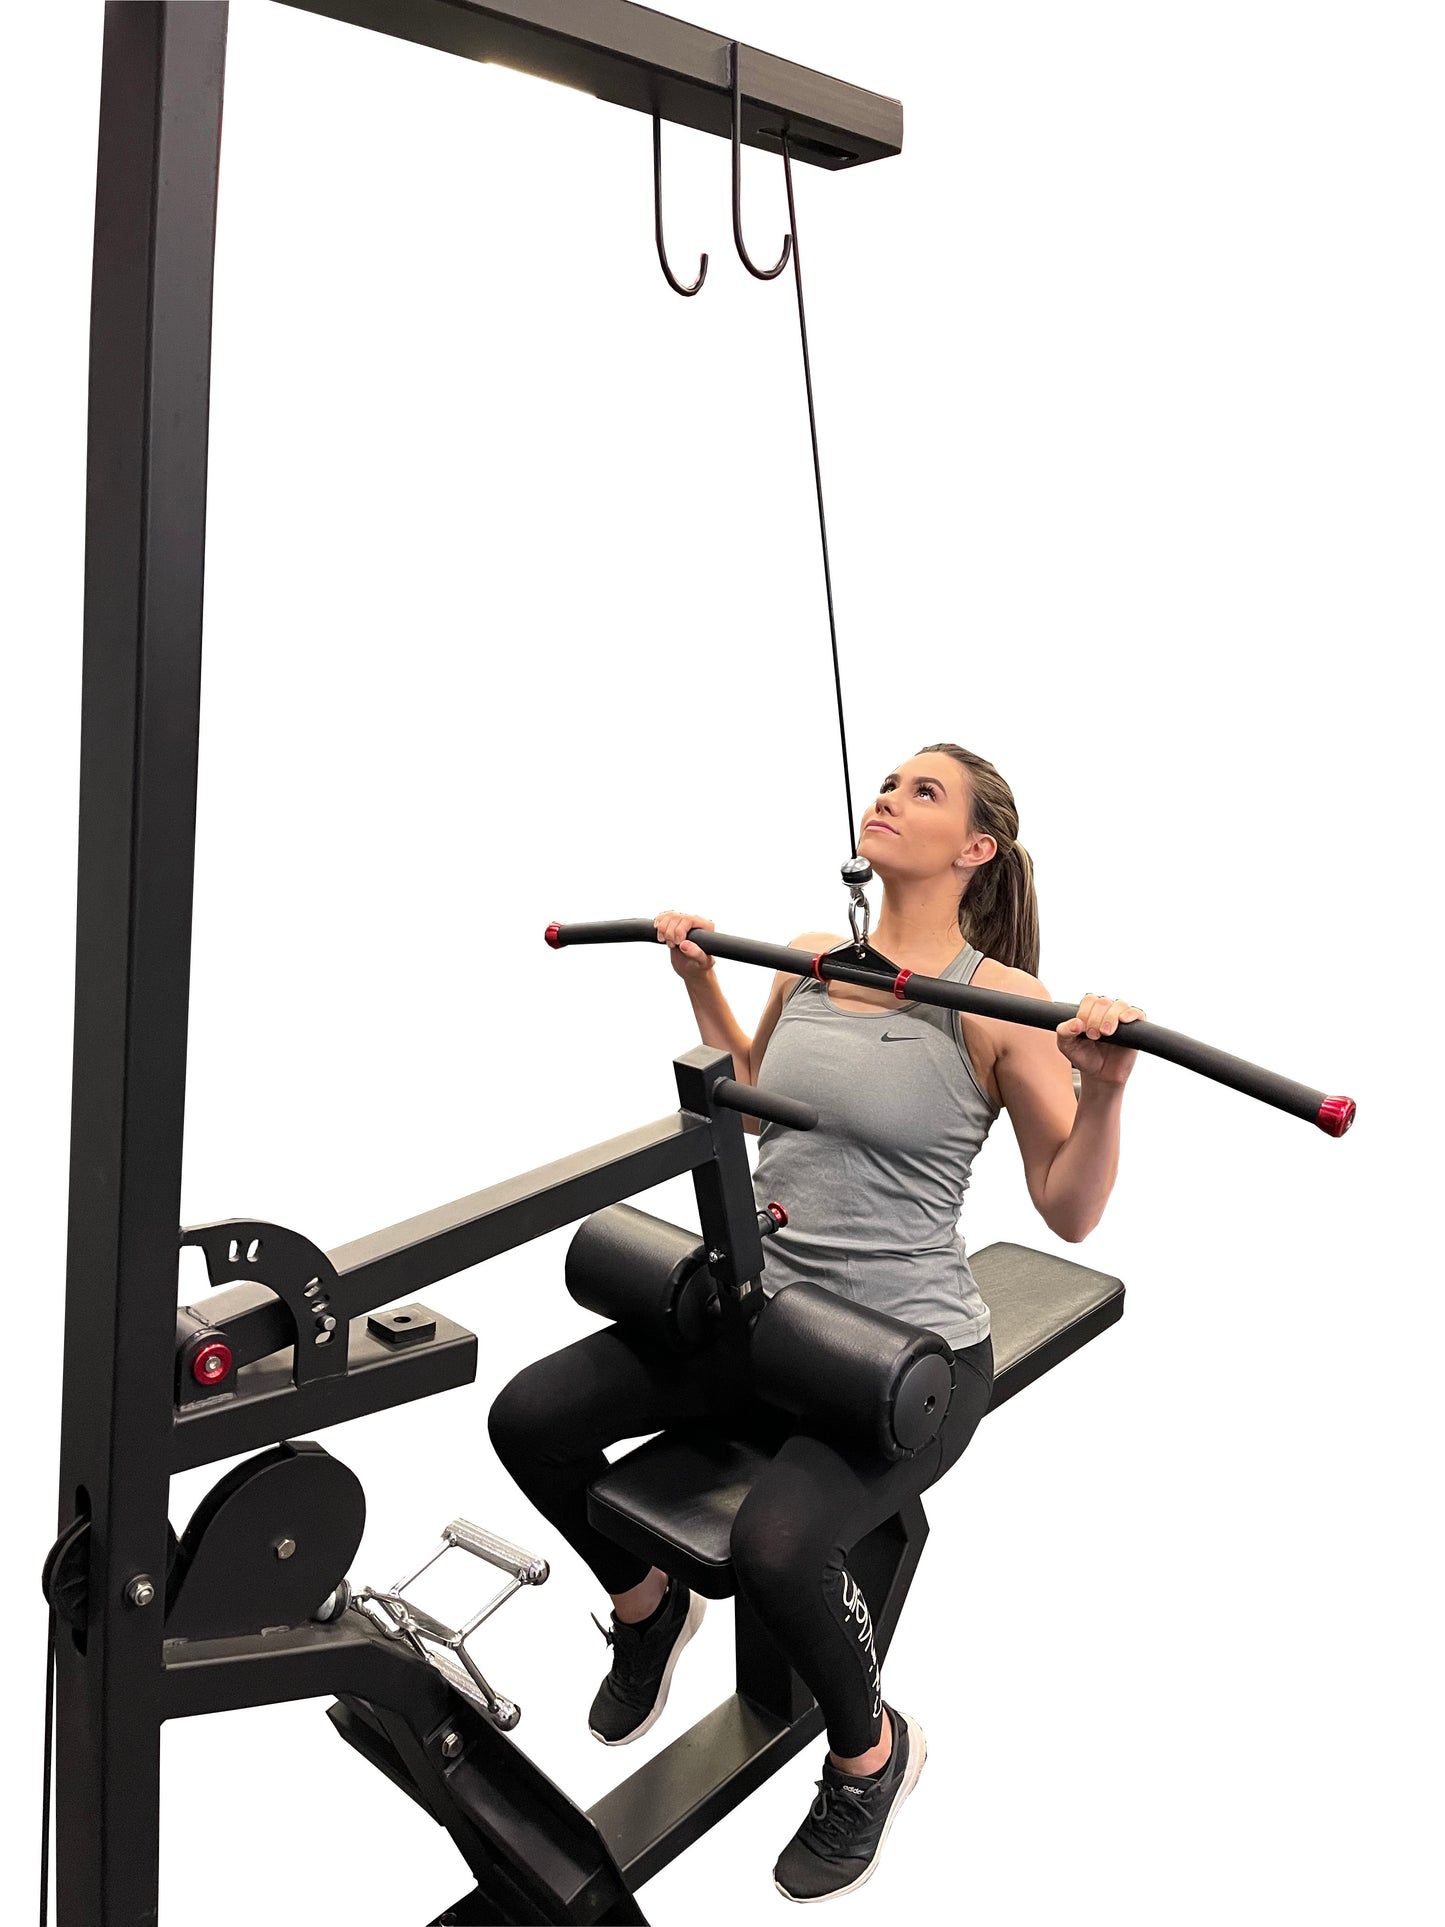 SB Fitness LPLR200S Commercial Lat Pulldown/Low Row Combo